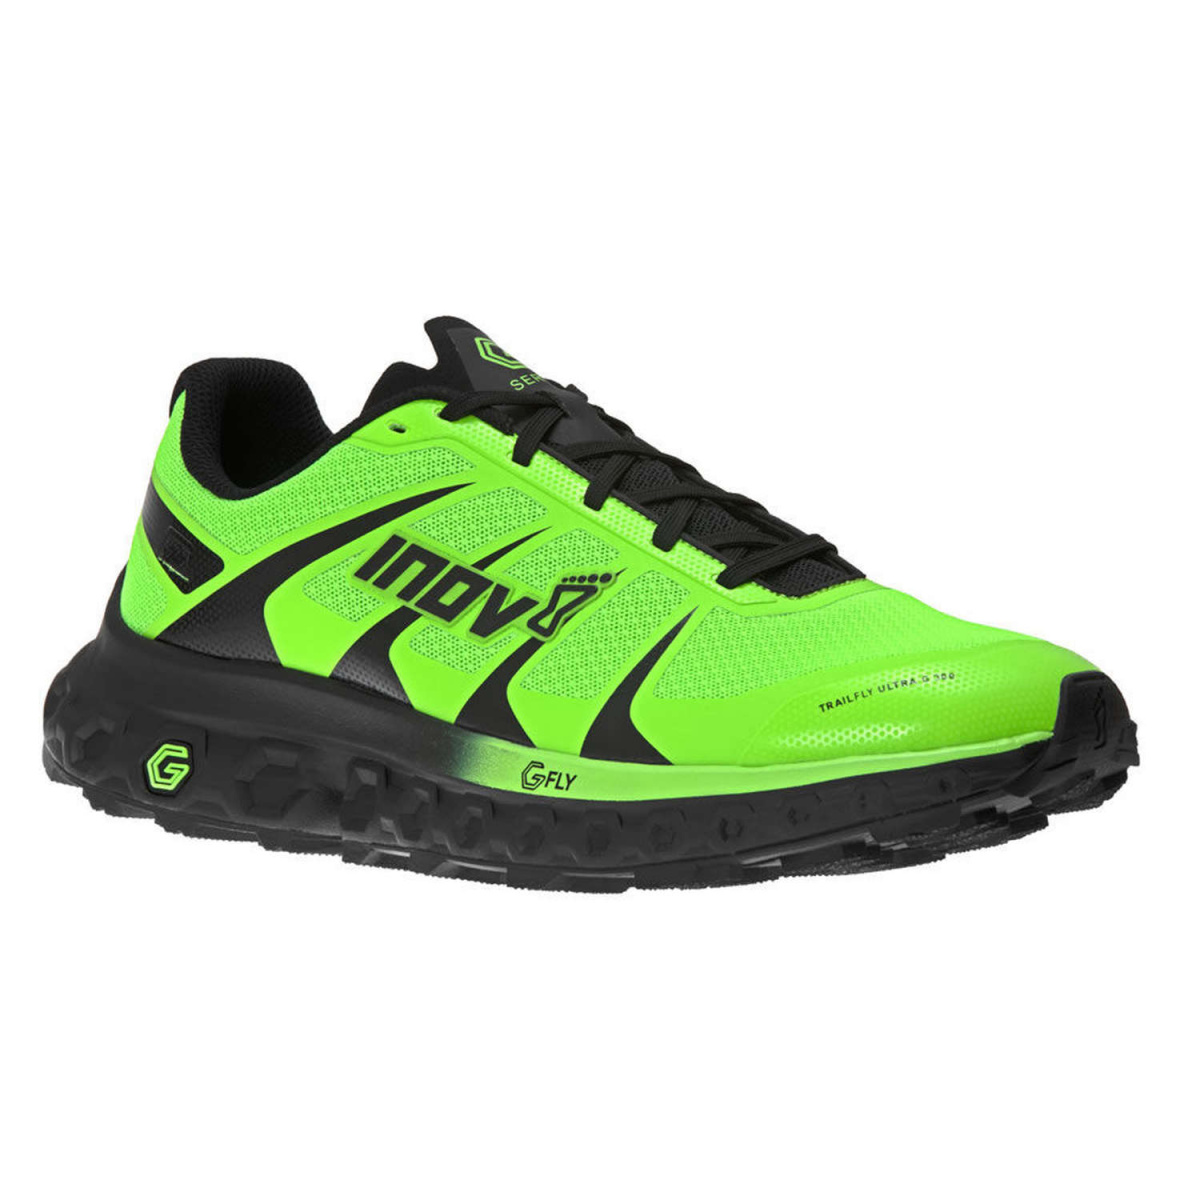 inov 8 Terrafly Ultra cushioned Trail running shoe at Fast and Light 08